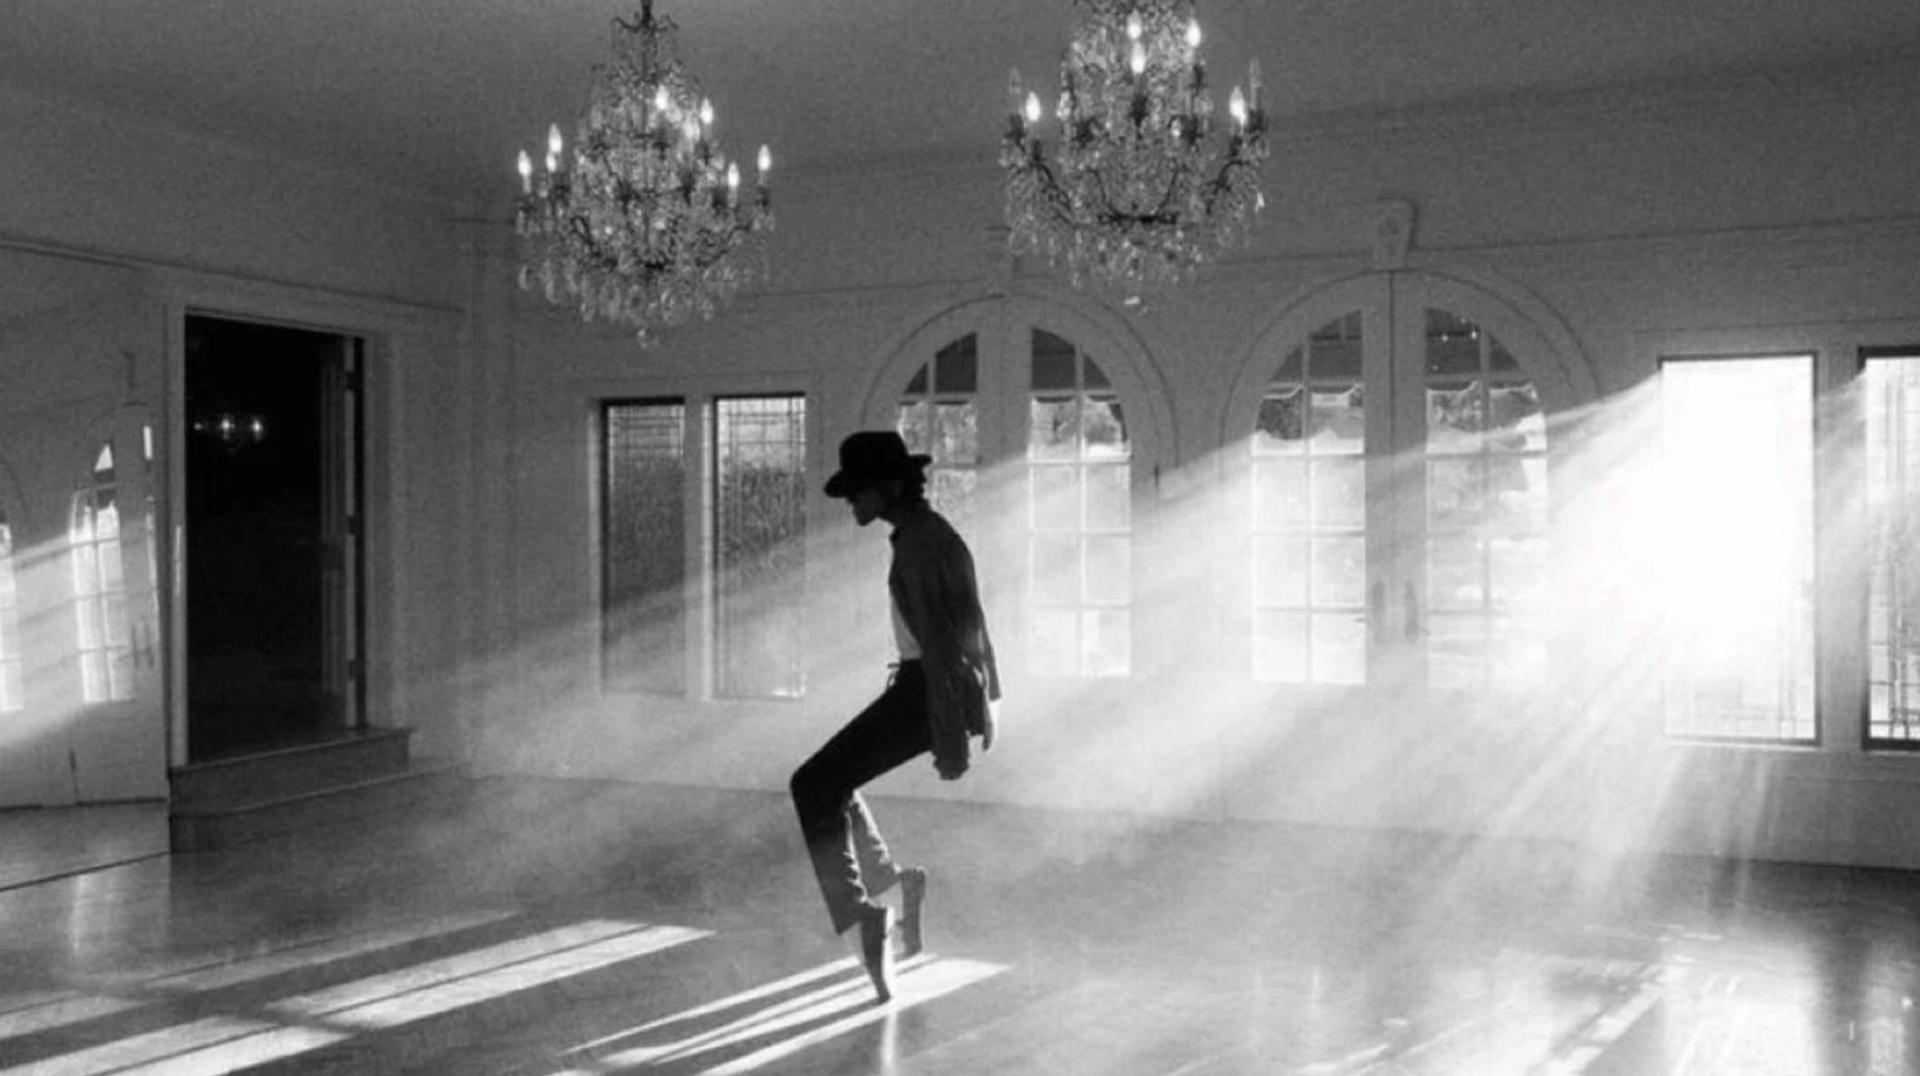 Lionsgate stunned theater owners in Las Vegas, with a poignant preview of 'Michael,' the highly anticipated biopic about The King of Pop, Michael Jackson.